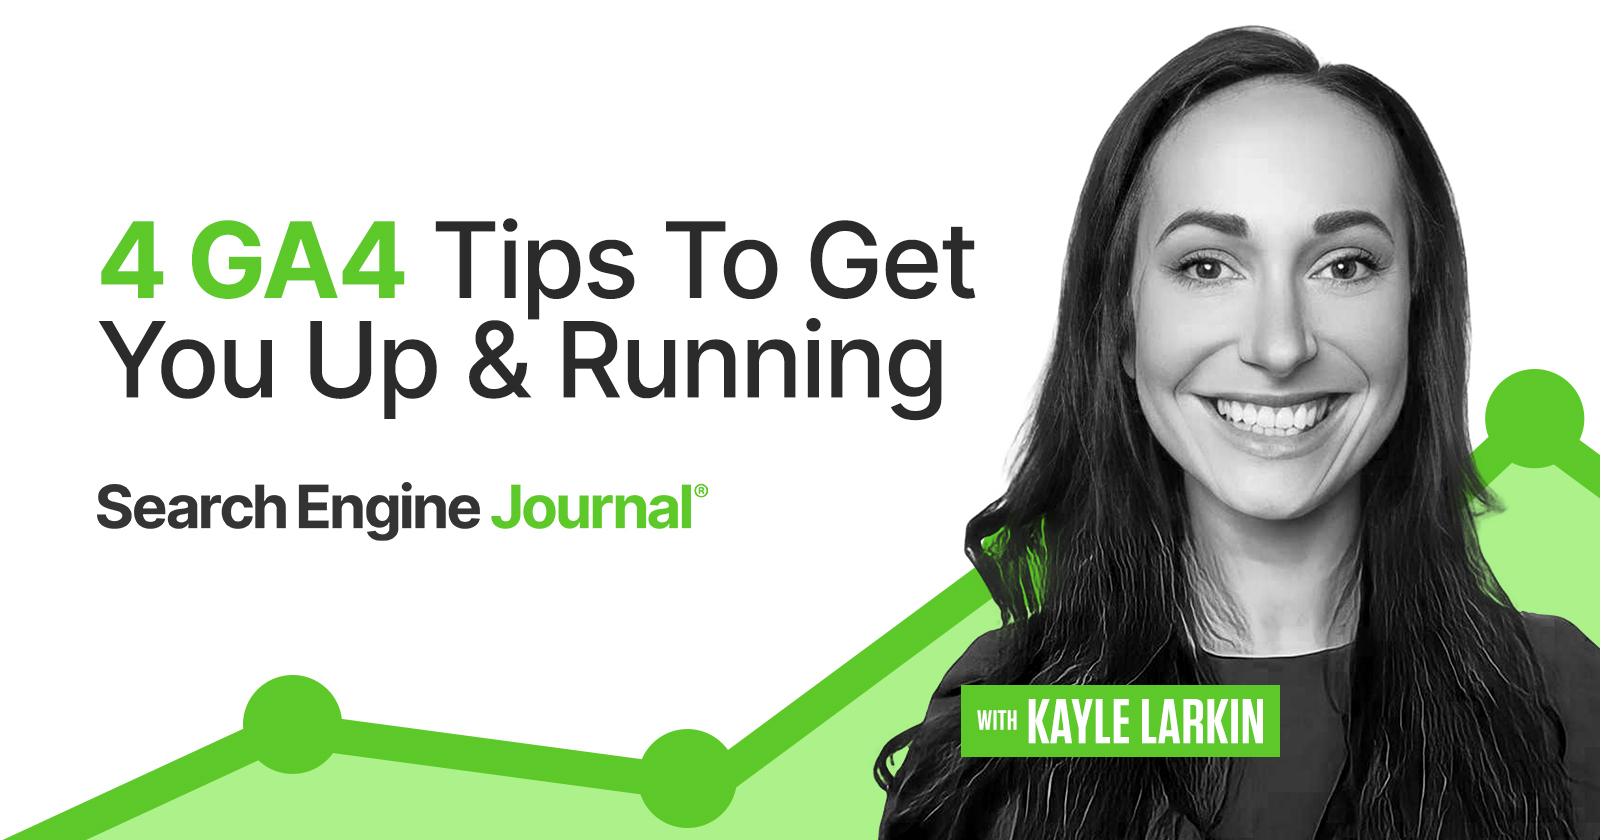 Getting Started With GA4: These 4 Tips Will Get You Up & Running via @sejournal, @KayleLarkin